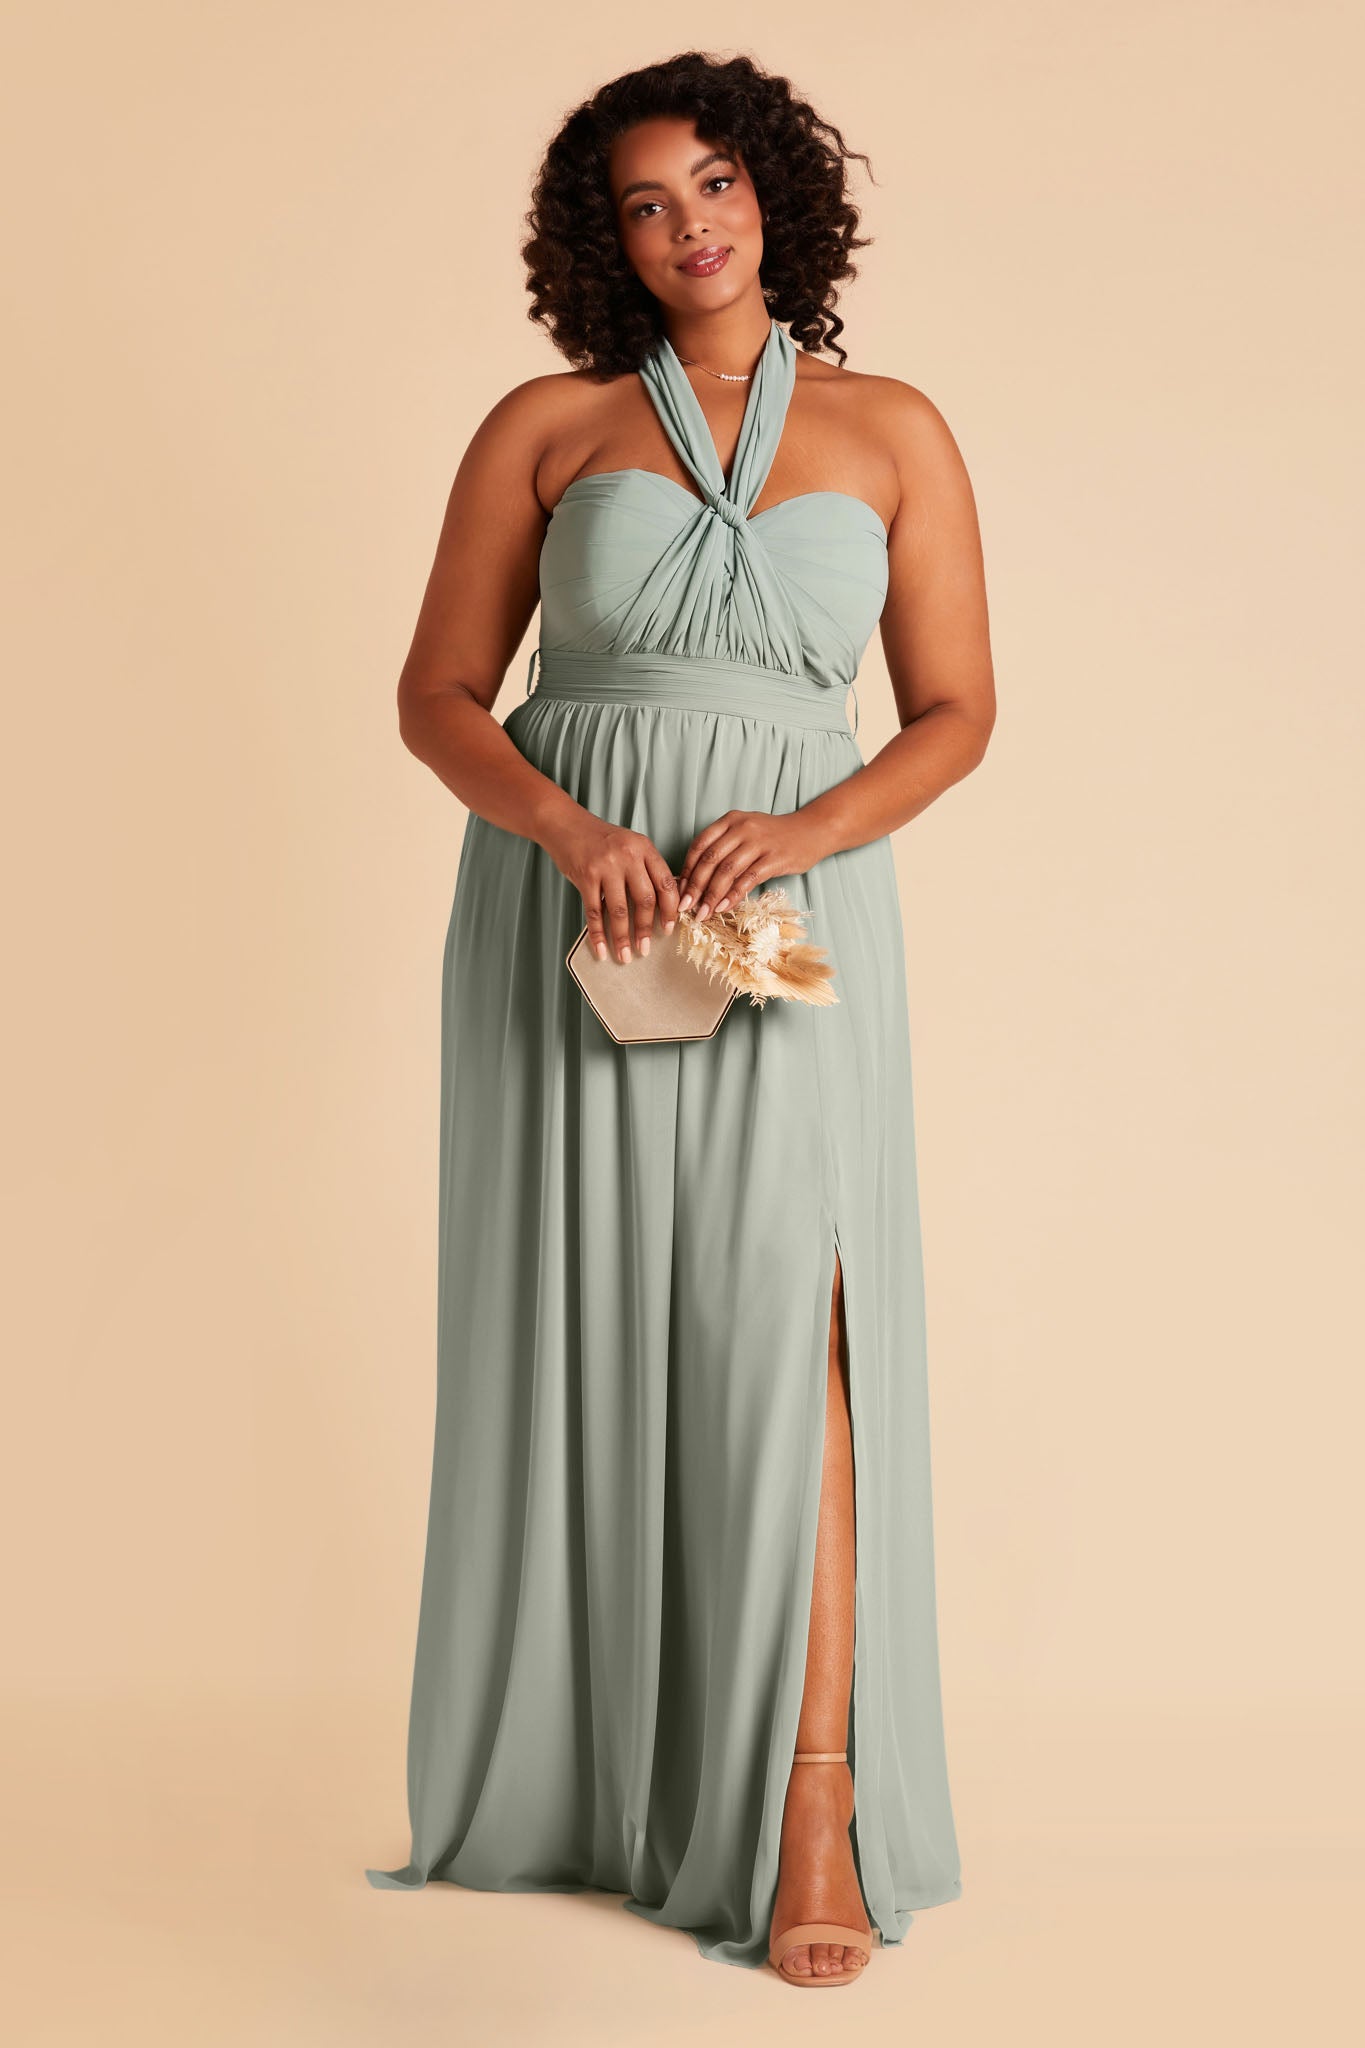 Front view of the Grace Convertible Plus Size Bridesmaid Dress in sage chiffon worn by a curvy model with medium-tone skin.